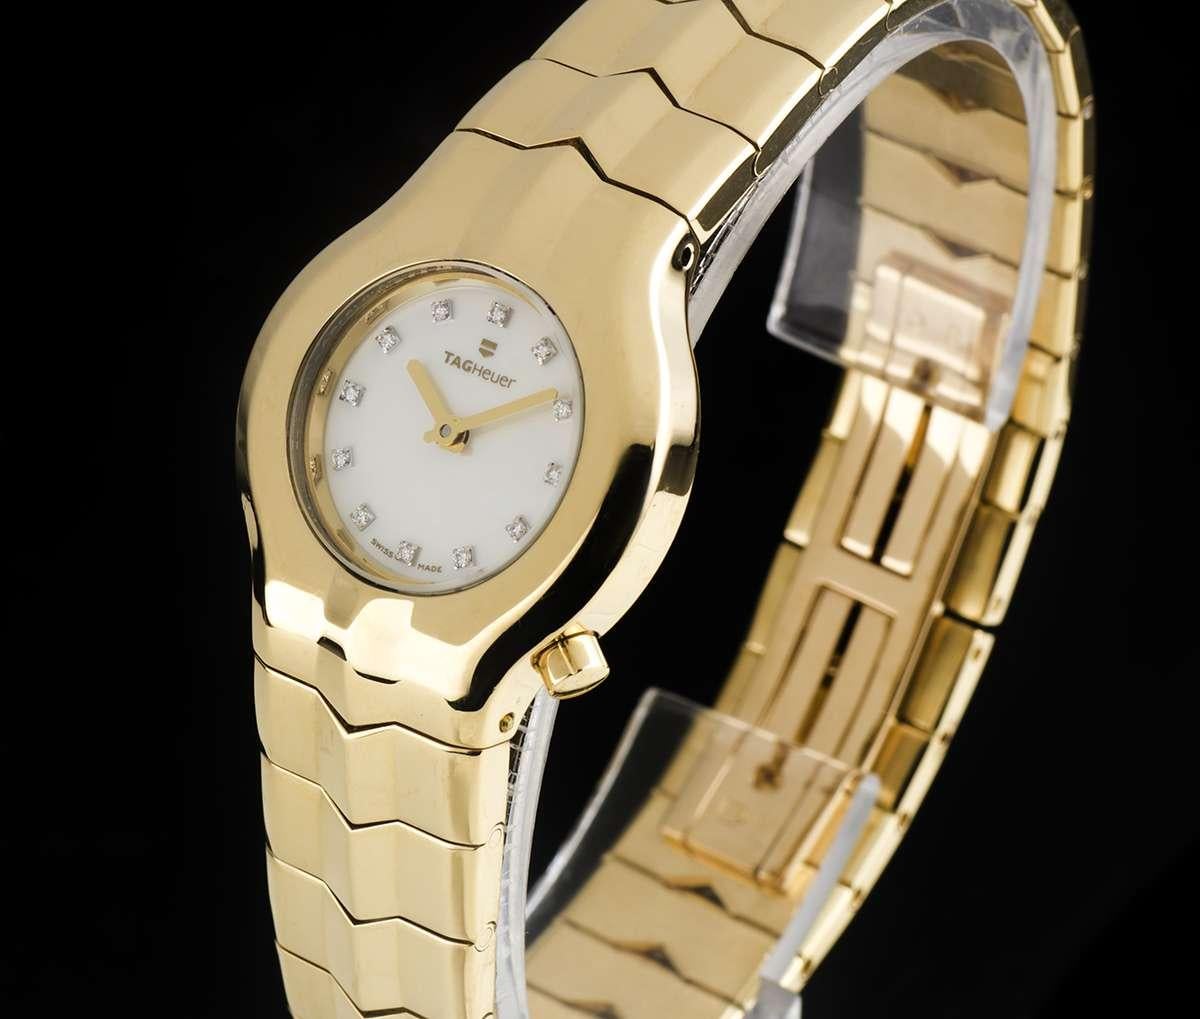 An 18k Yellow Gold Alter Ego Ladies Wristwatch, mother of pearl (MOP) dial set with 12 round brilliant cut diamond hour markers, a fixed 18k yellow gold bezel, an 18k yellow gold bracelet with an 18k yellow gold concealed double deployant clasp,